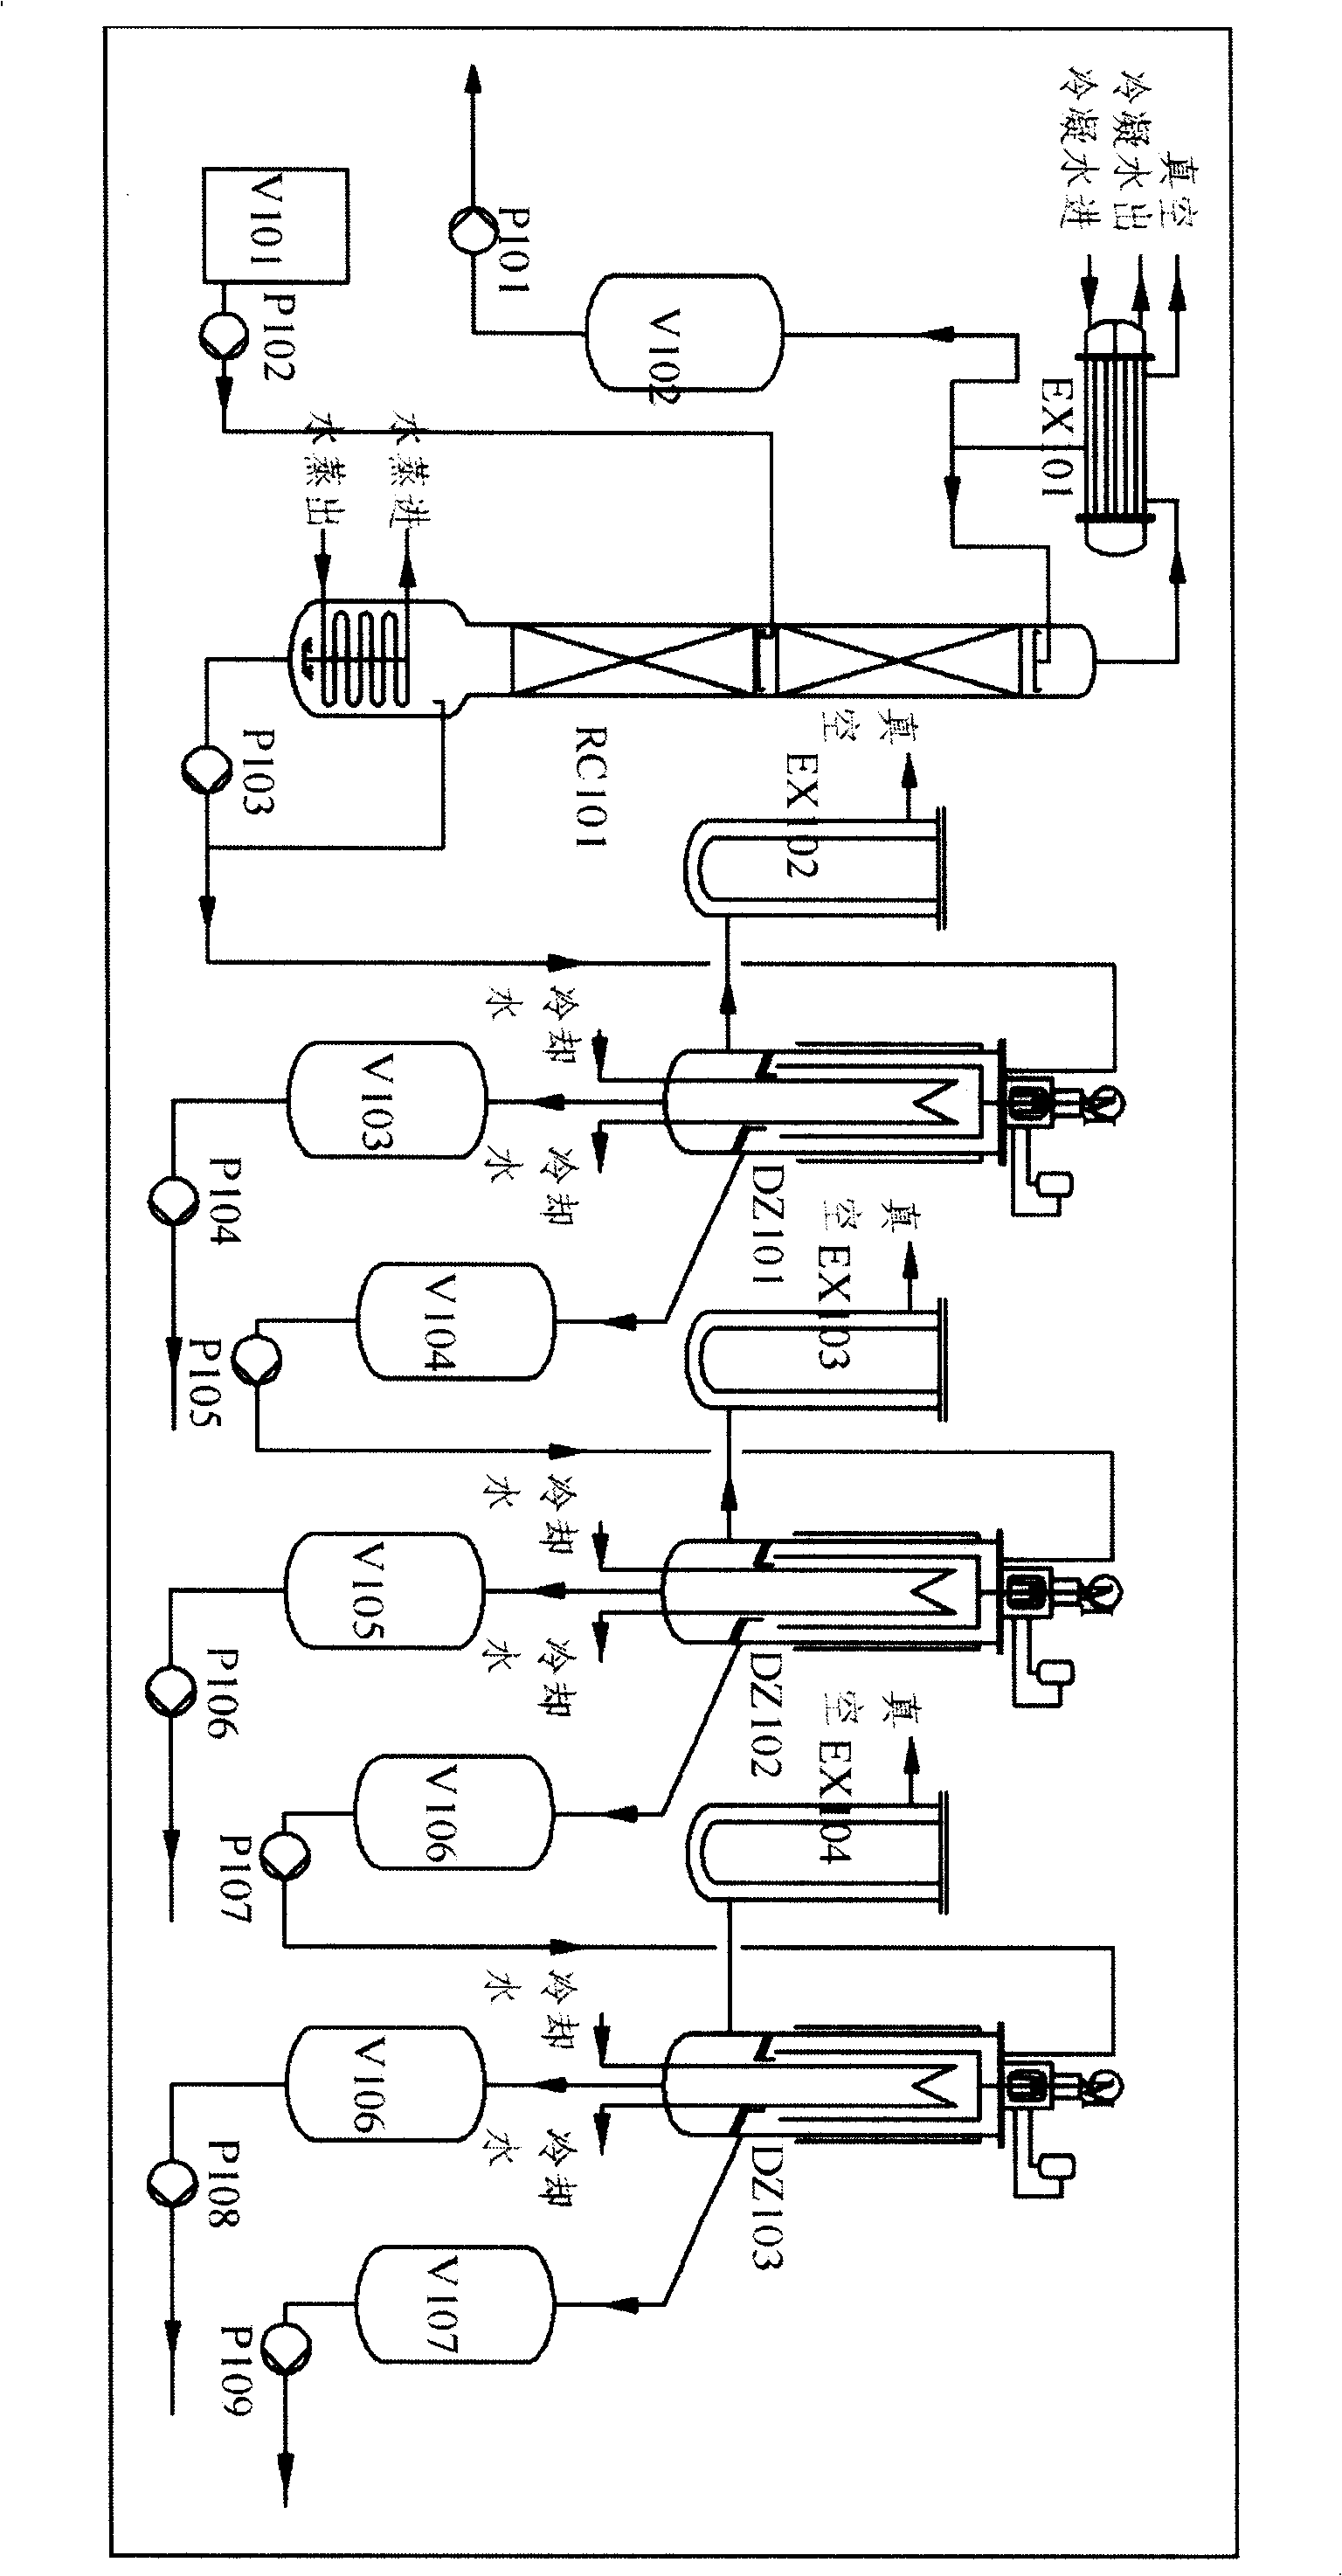 Application of distillation and multi-stage molecular distillation technique in regeneration process for waste lubricant oil